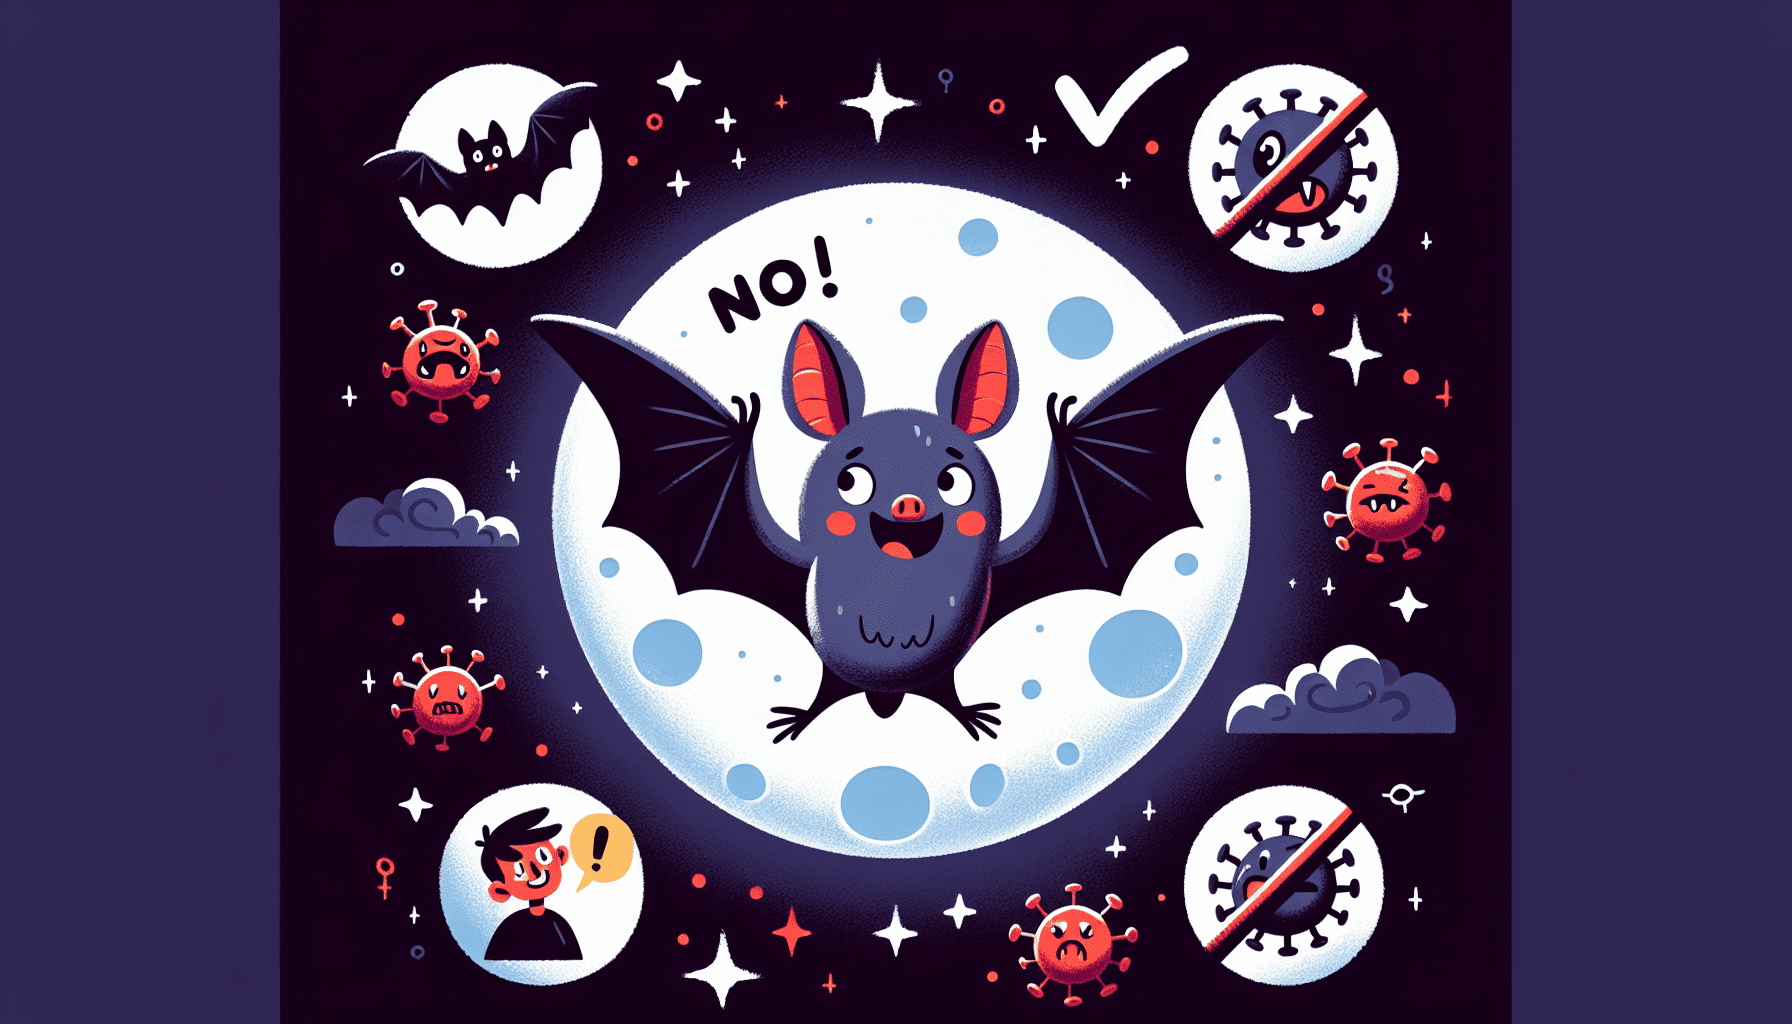 Illustration debunking common bat myths and misconceptions